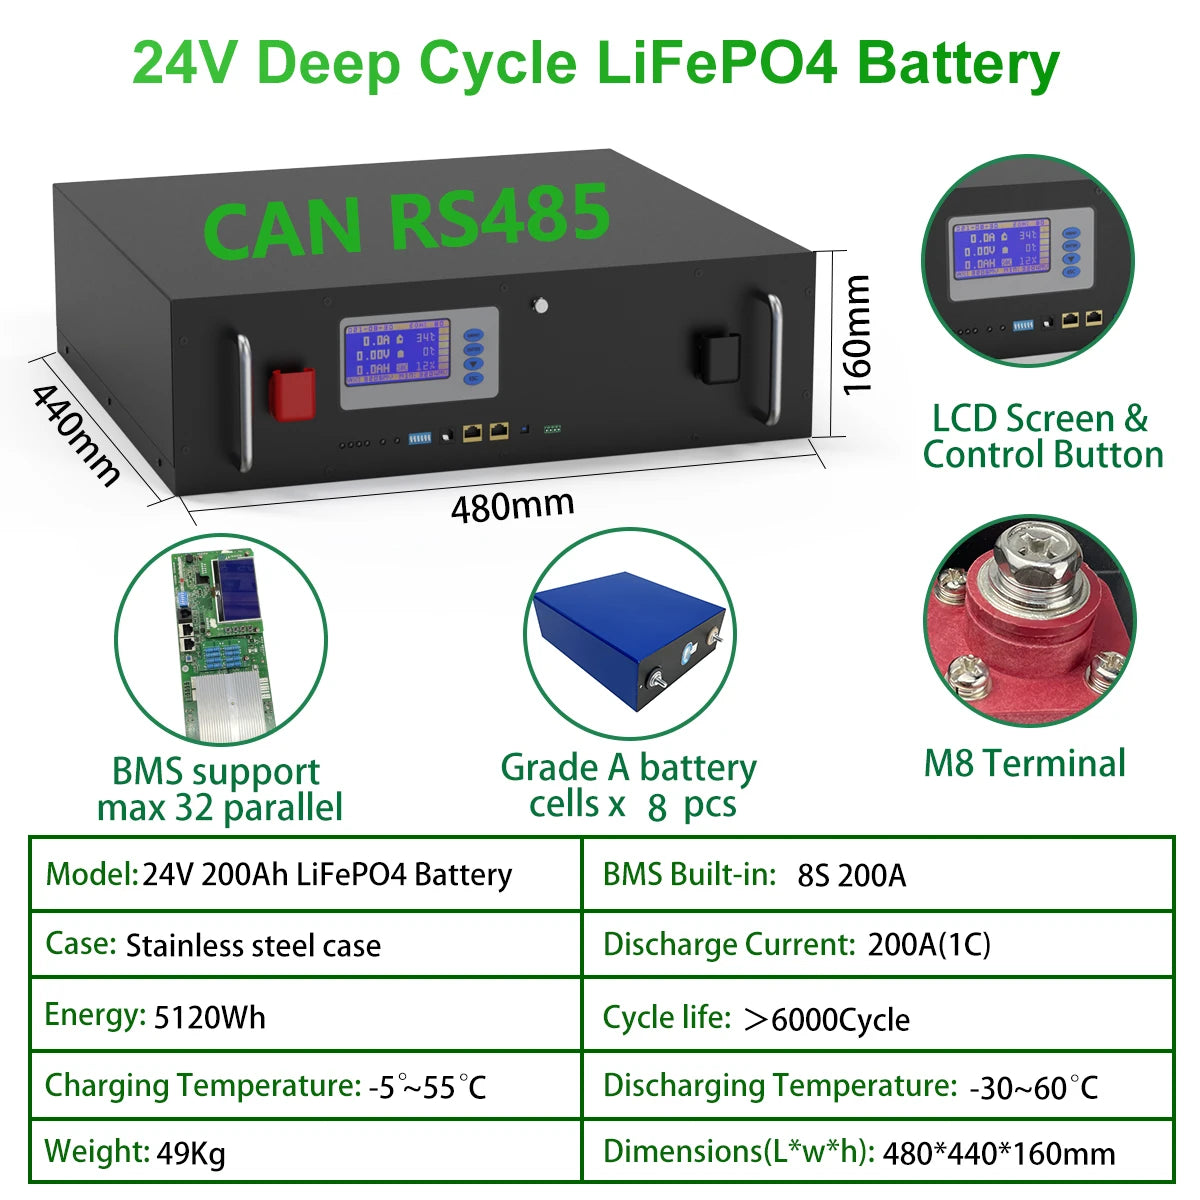 LiFePO4 24V 5KW Battery, Lithium iron phosphate battery pack with built-in management and 5120Wh capacity.